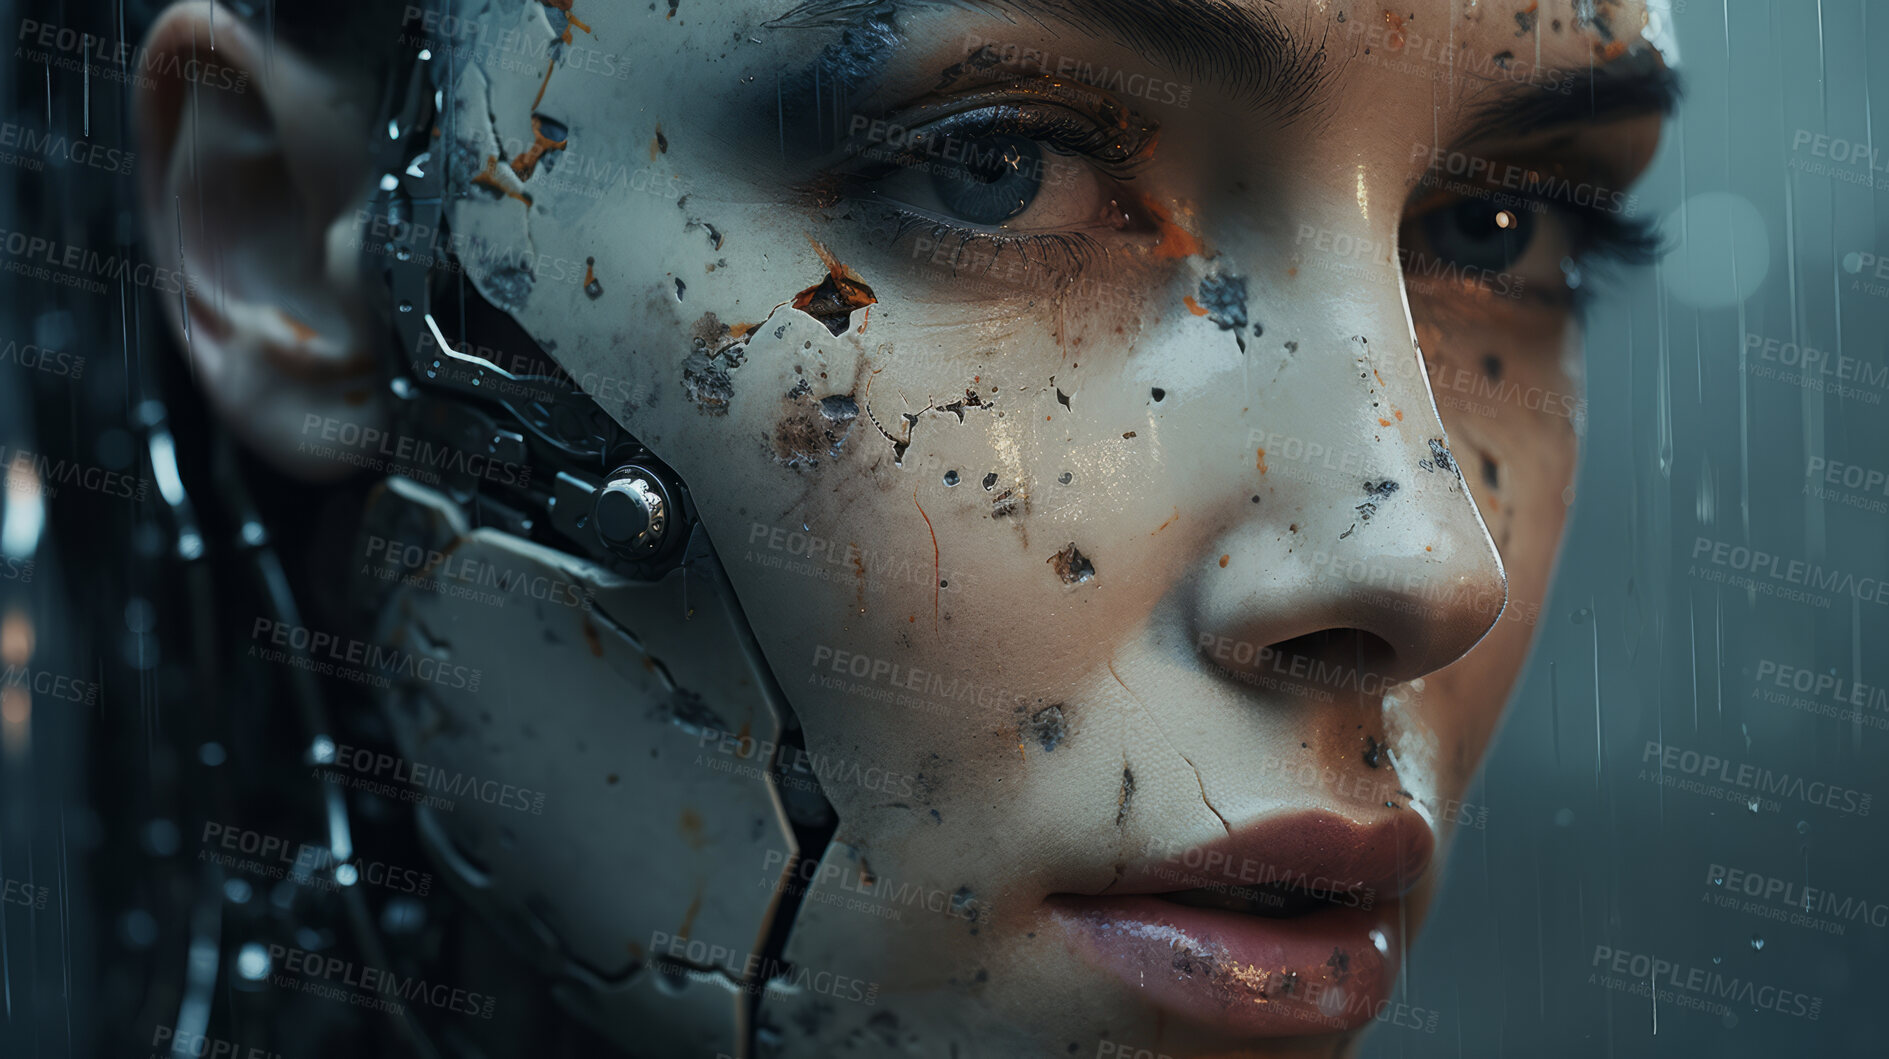 Buy stock photo Close up of futuristic, robotic humanoid. Human face with mechanical features sci-fi features.